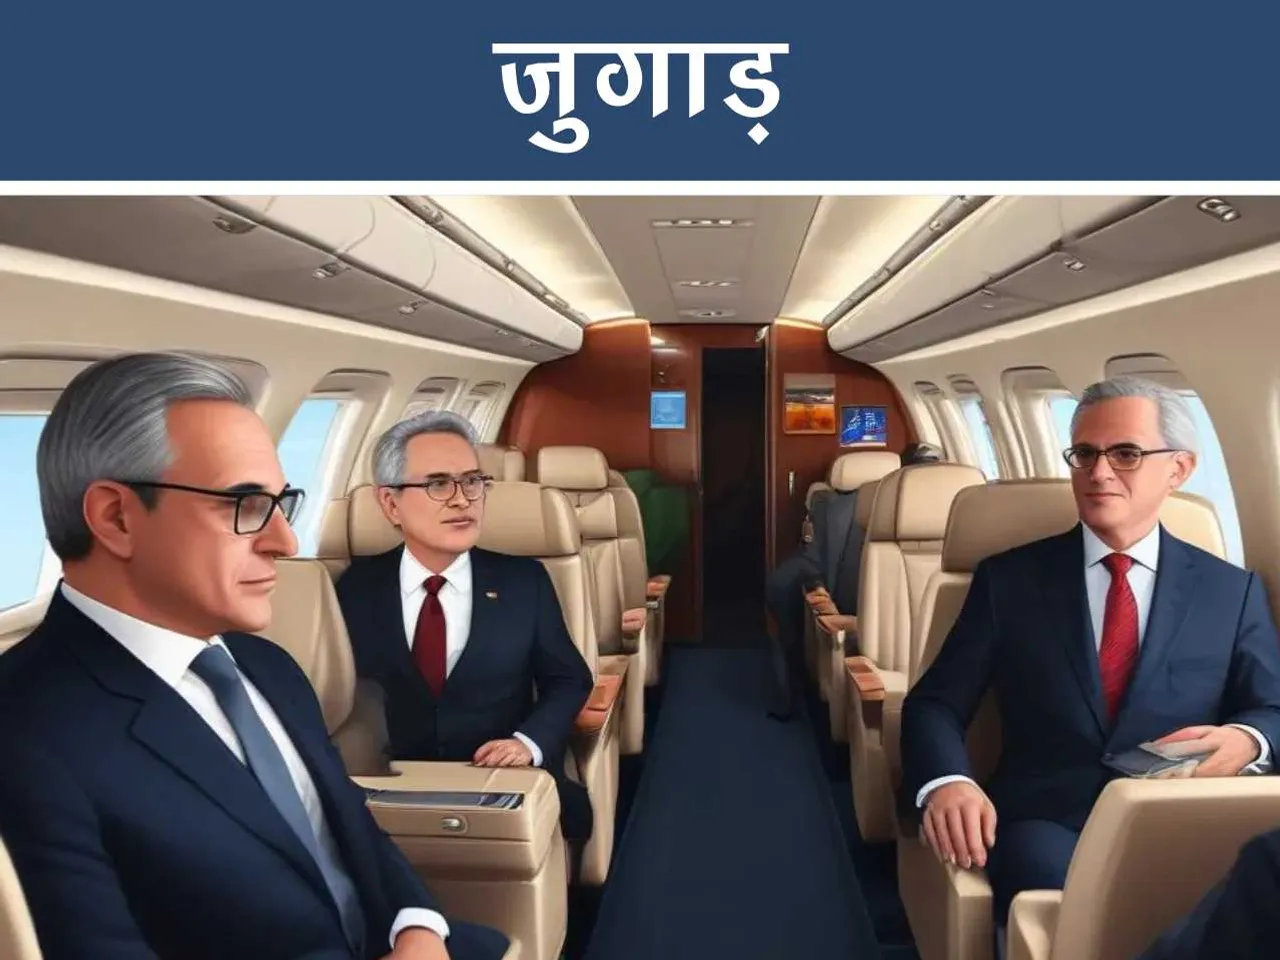 Foreign ministers on plane